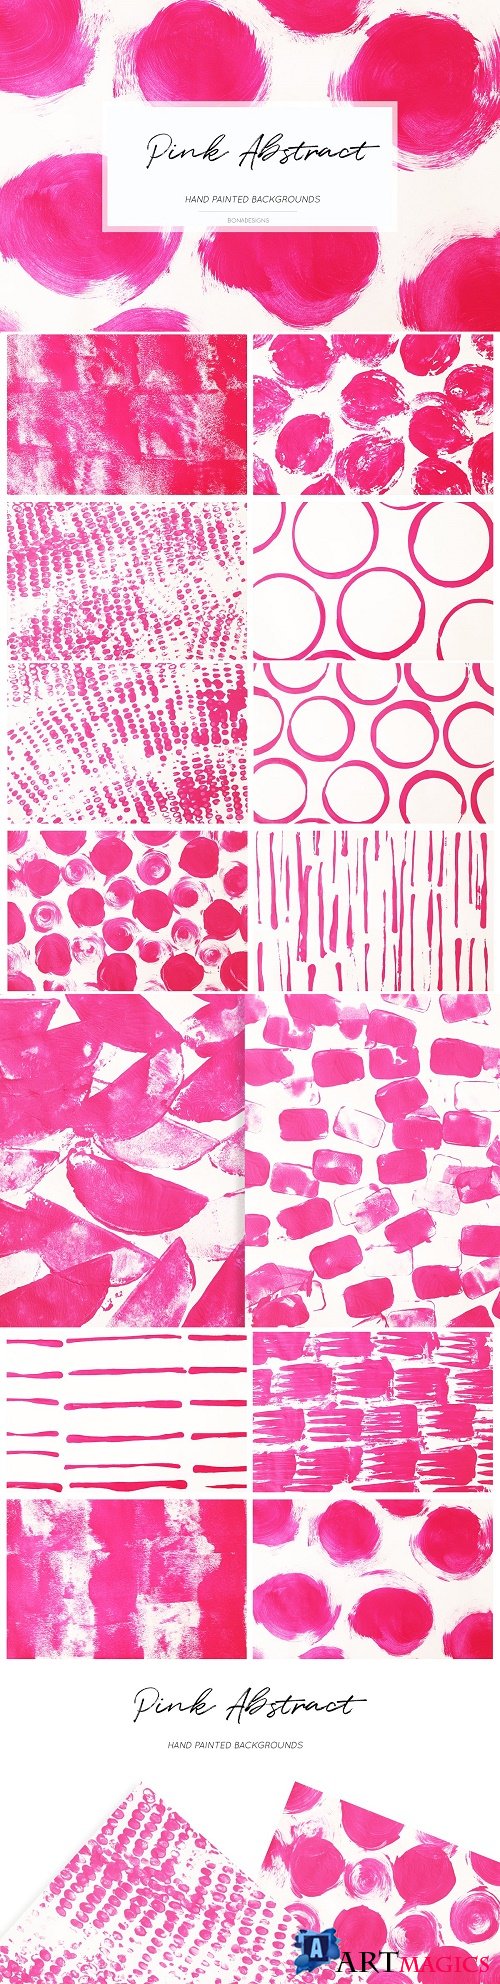 Pink Abstract Backgrounds - 3972474